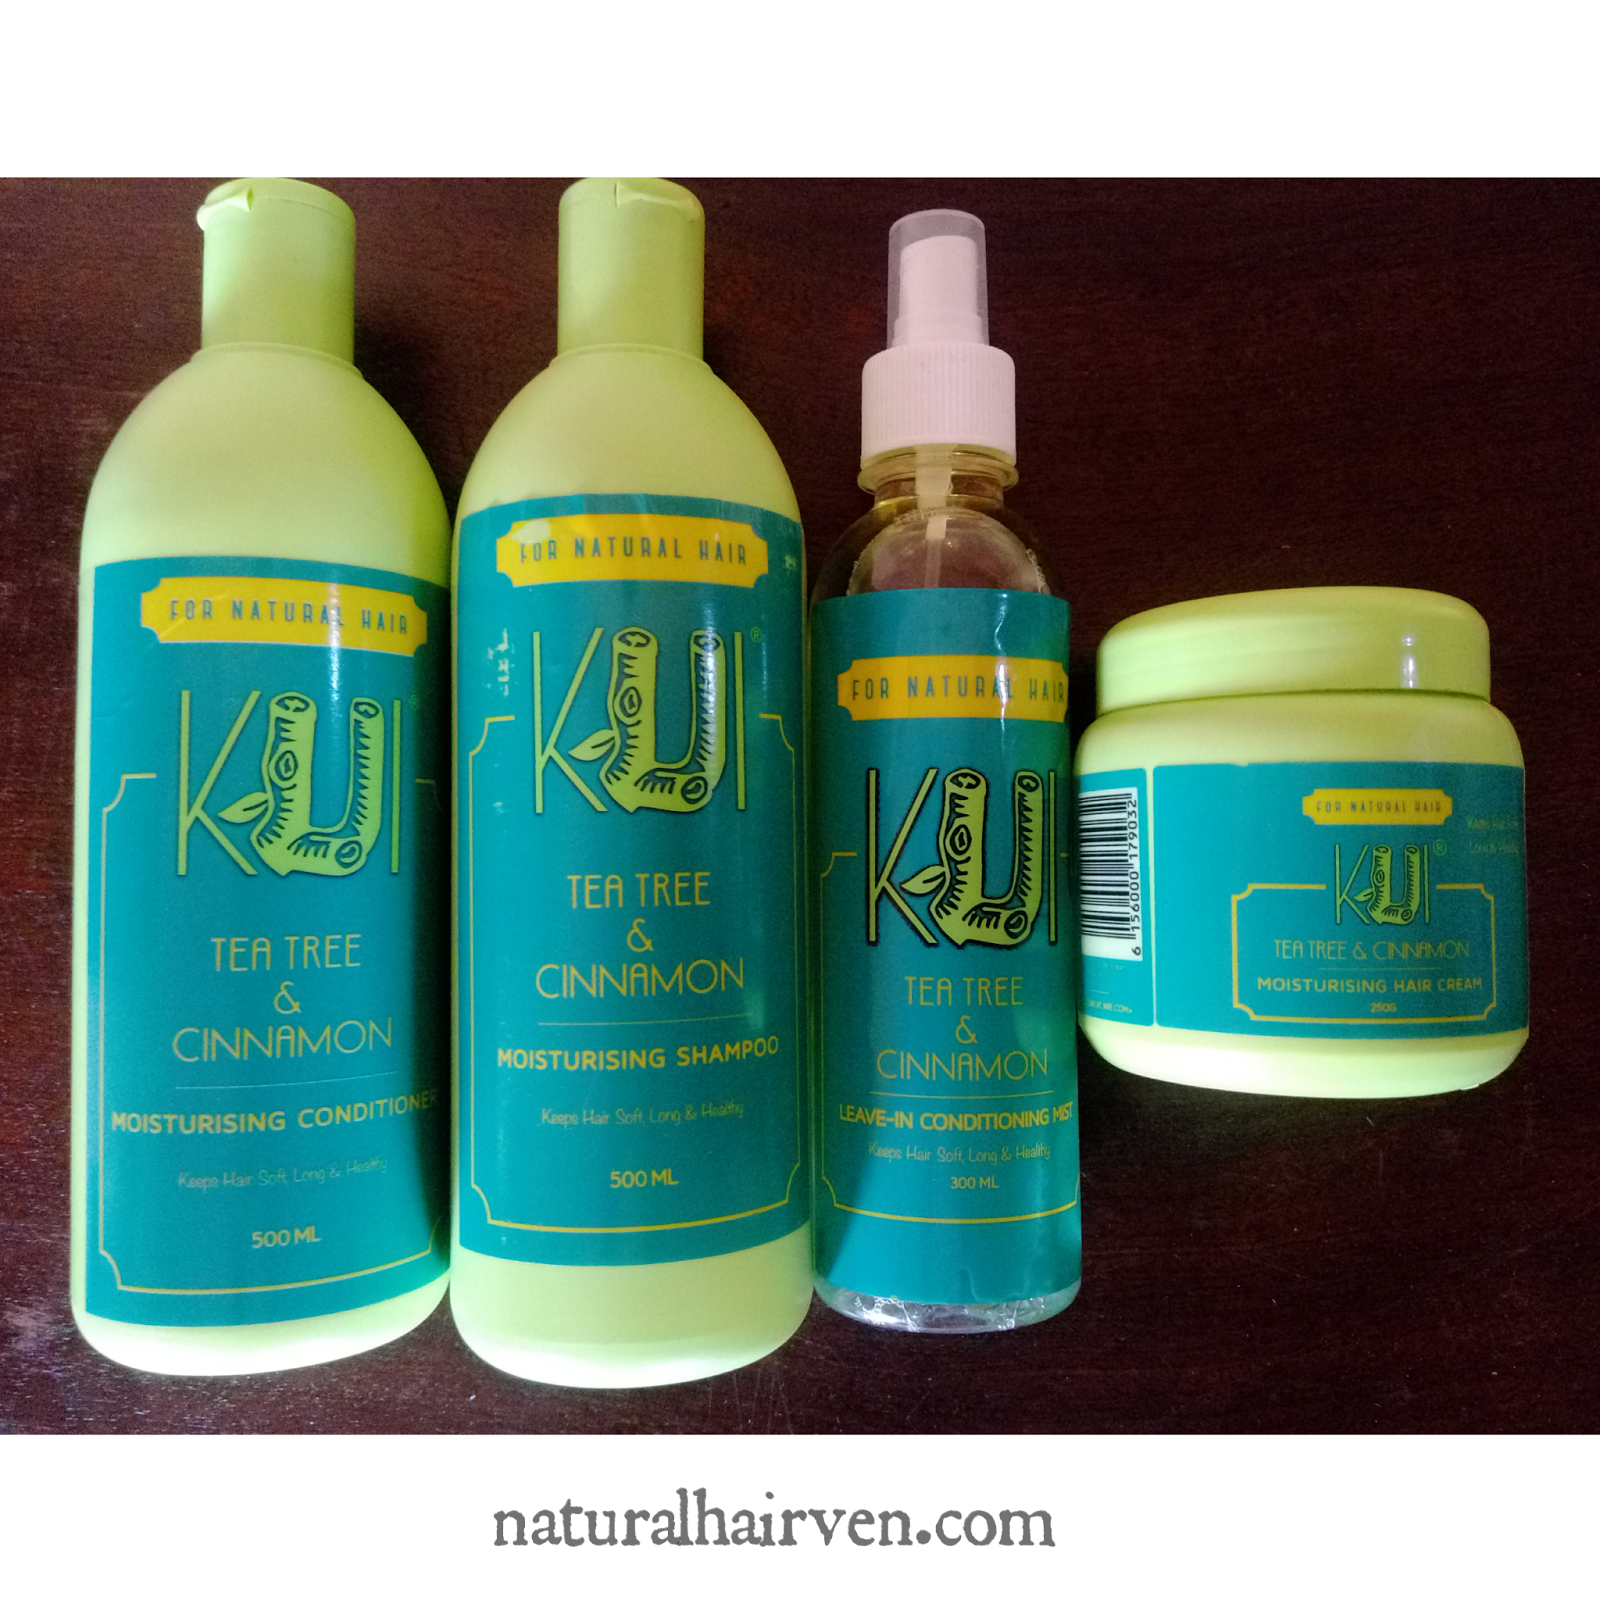 PRODUCT REVIEW KUI CARE TEA TREE AND CINNAMON RANGE Natural Hairven